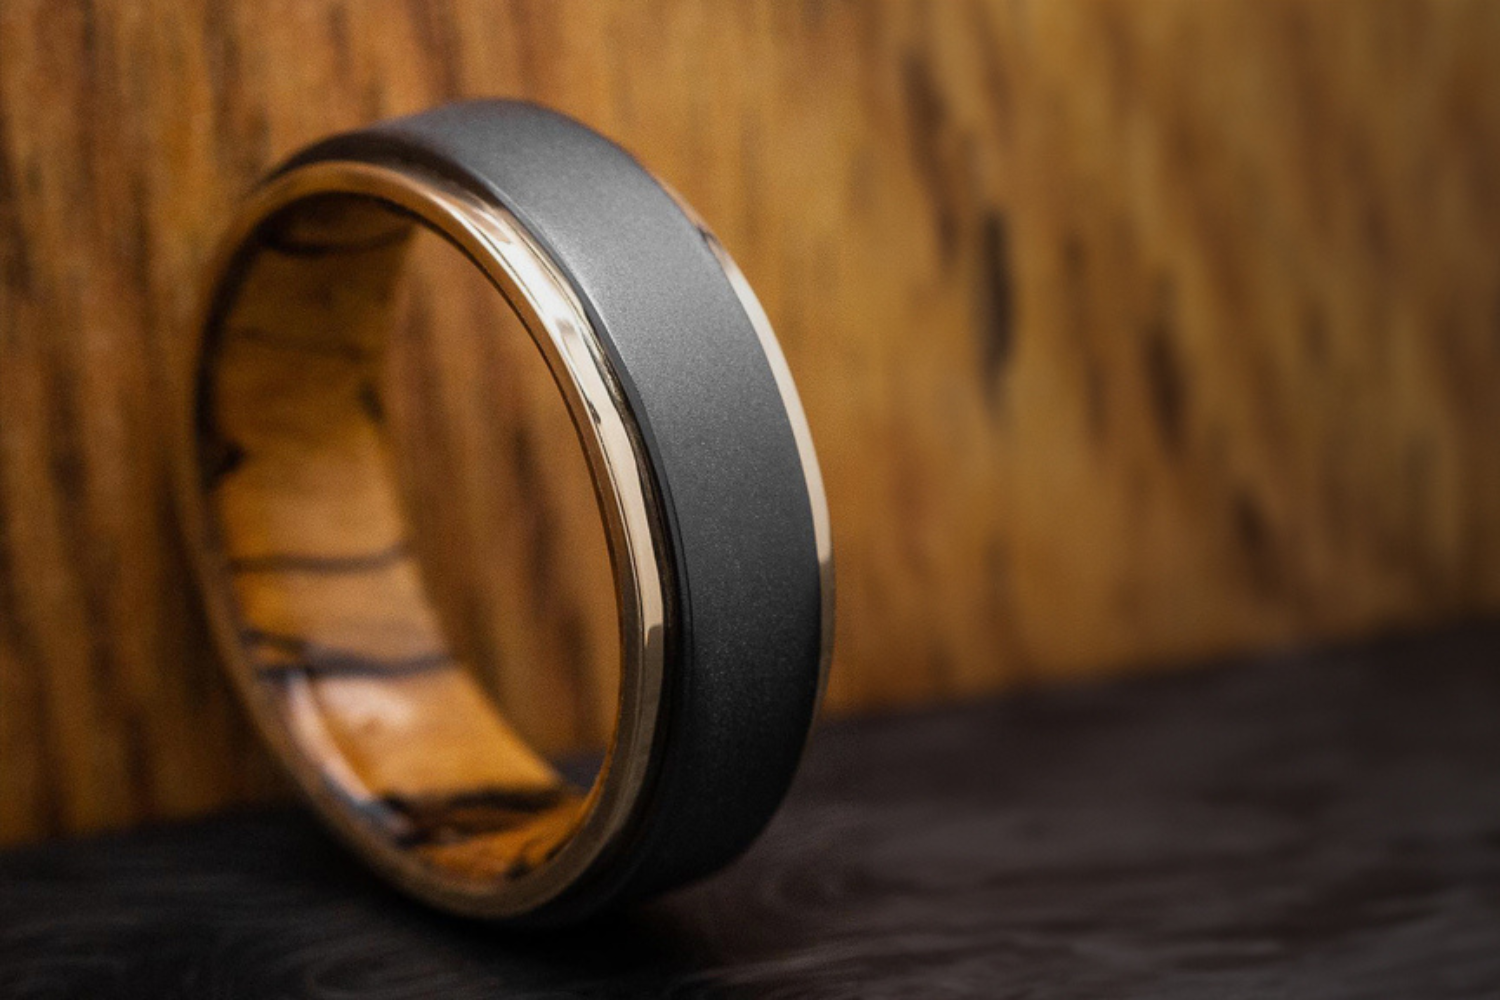 Revolution Jewelry's Guide to Men's Wedding Rings with Wood